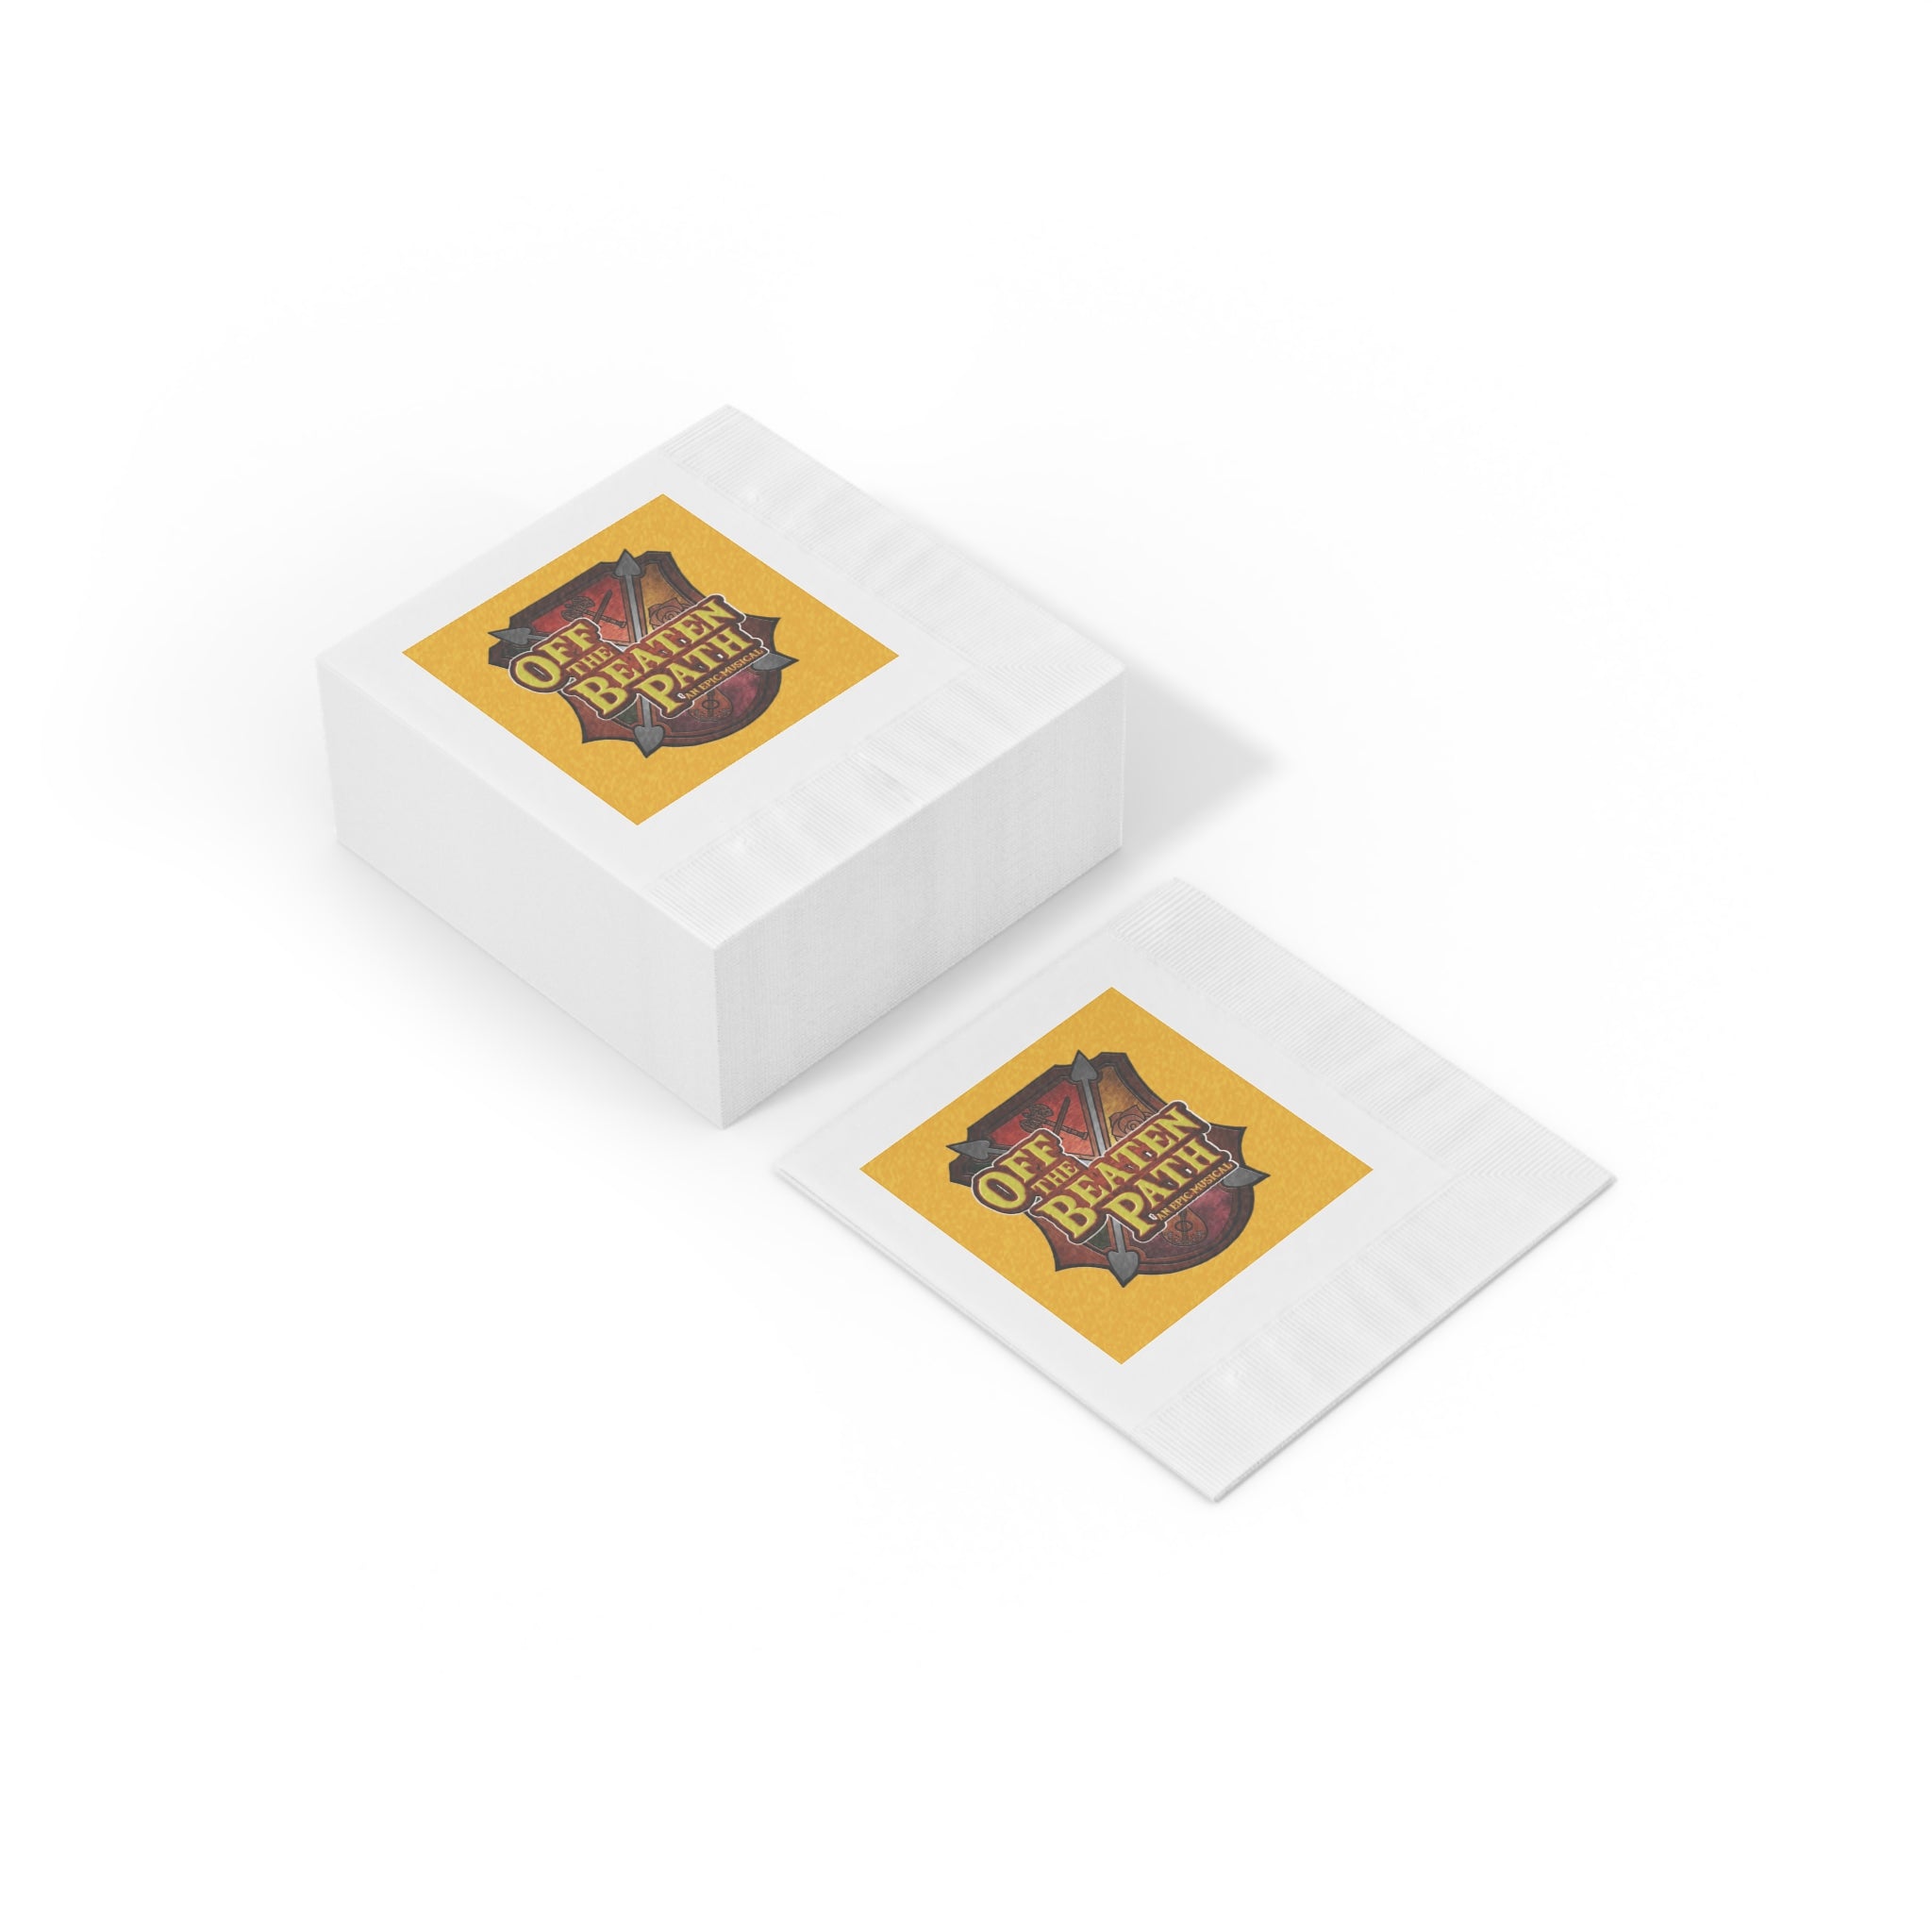 OBP Crest Coined Napkins - Yellow